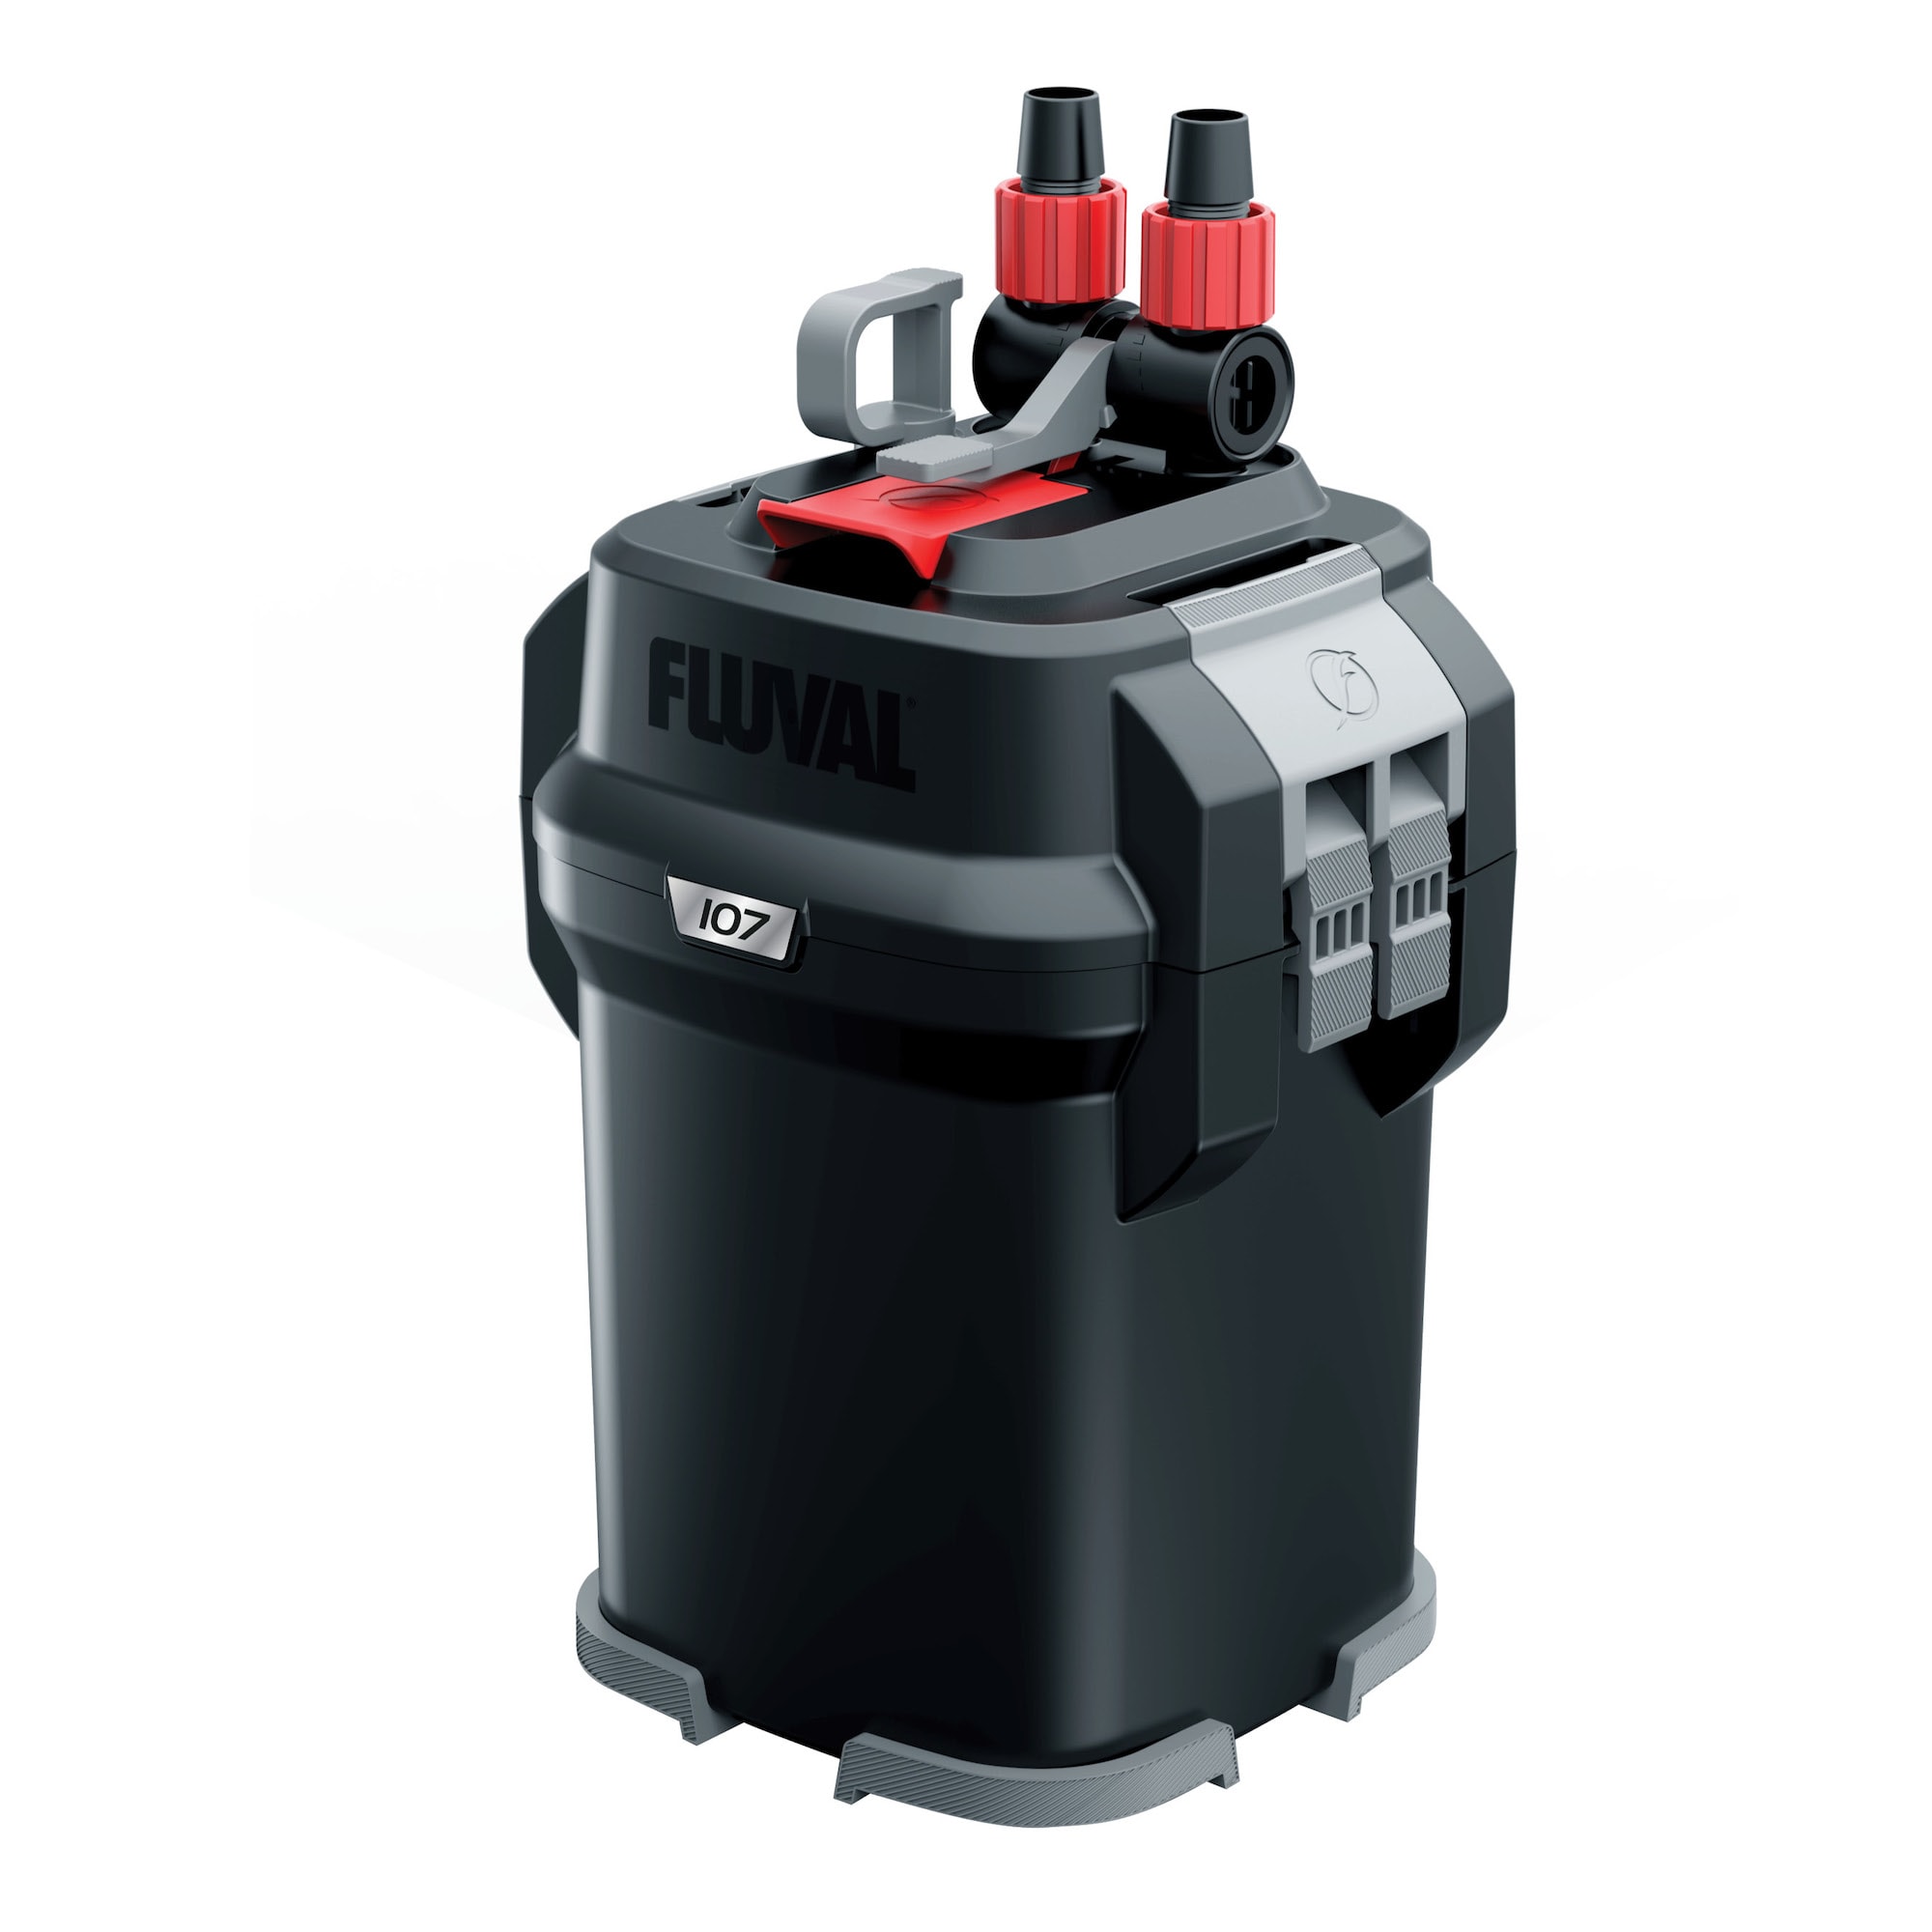 Fluval 107 Performance Canister Filter 120Vac